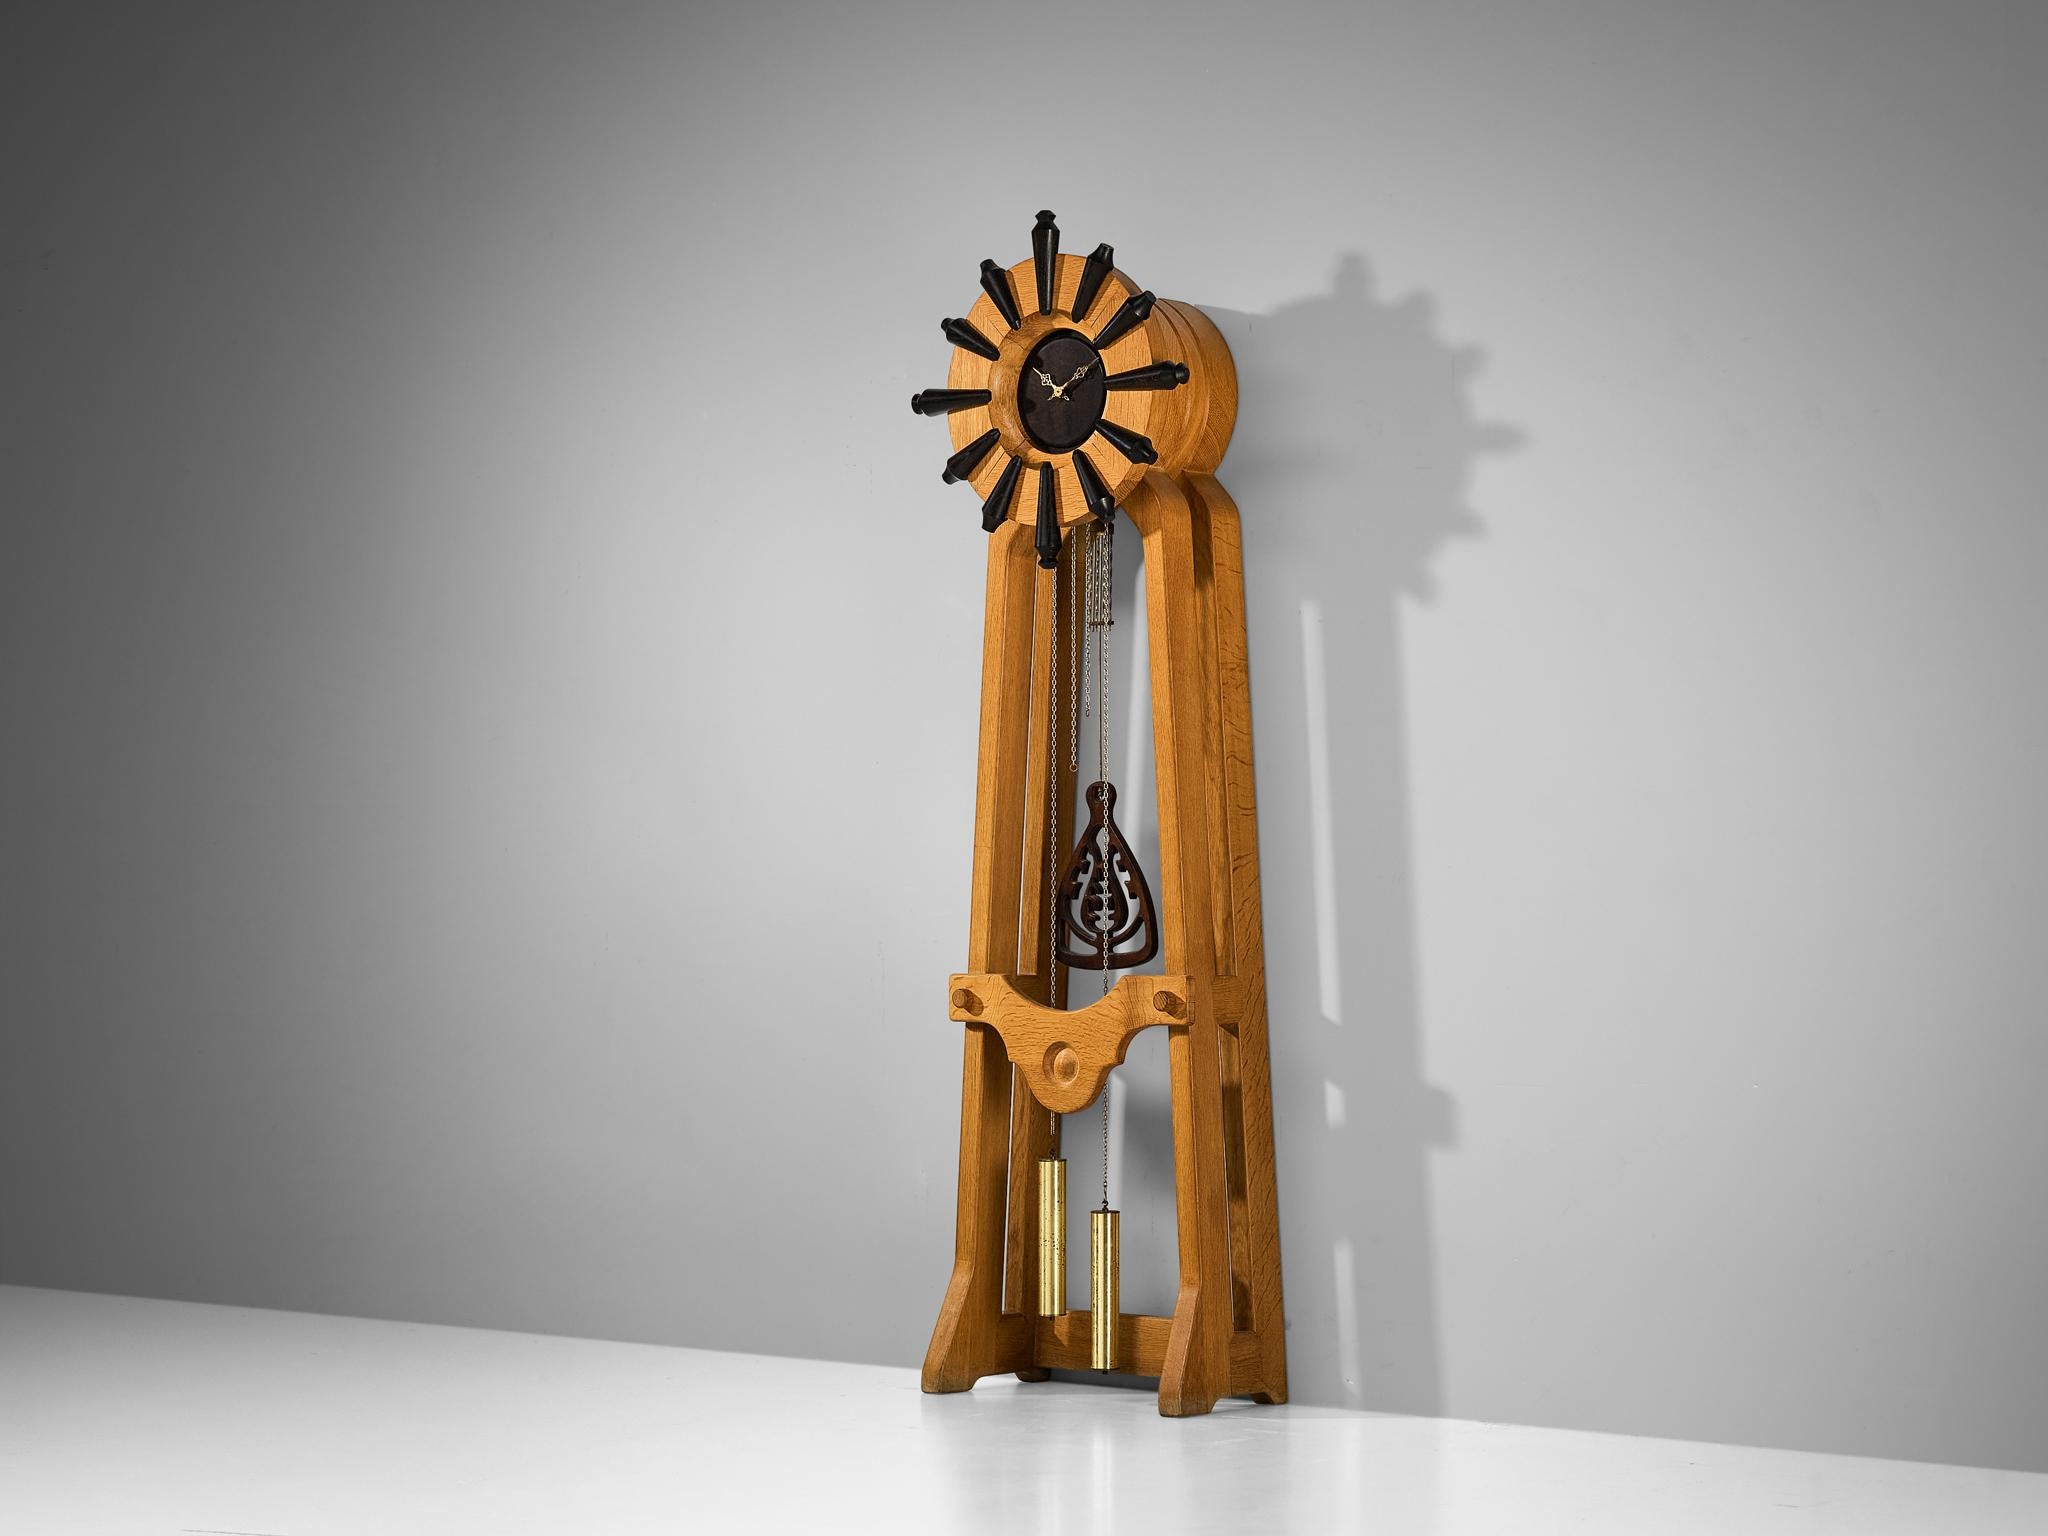 Guillerme et Chambron for Votre Maison, longcase clock, oak, brass, steel, France, 1960s.

Wonderful and large clock designed by Guillerme and Chambron. The piece shows a natural and convivial design that the French designer duo are well-known for.